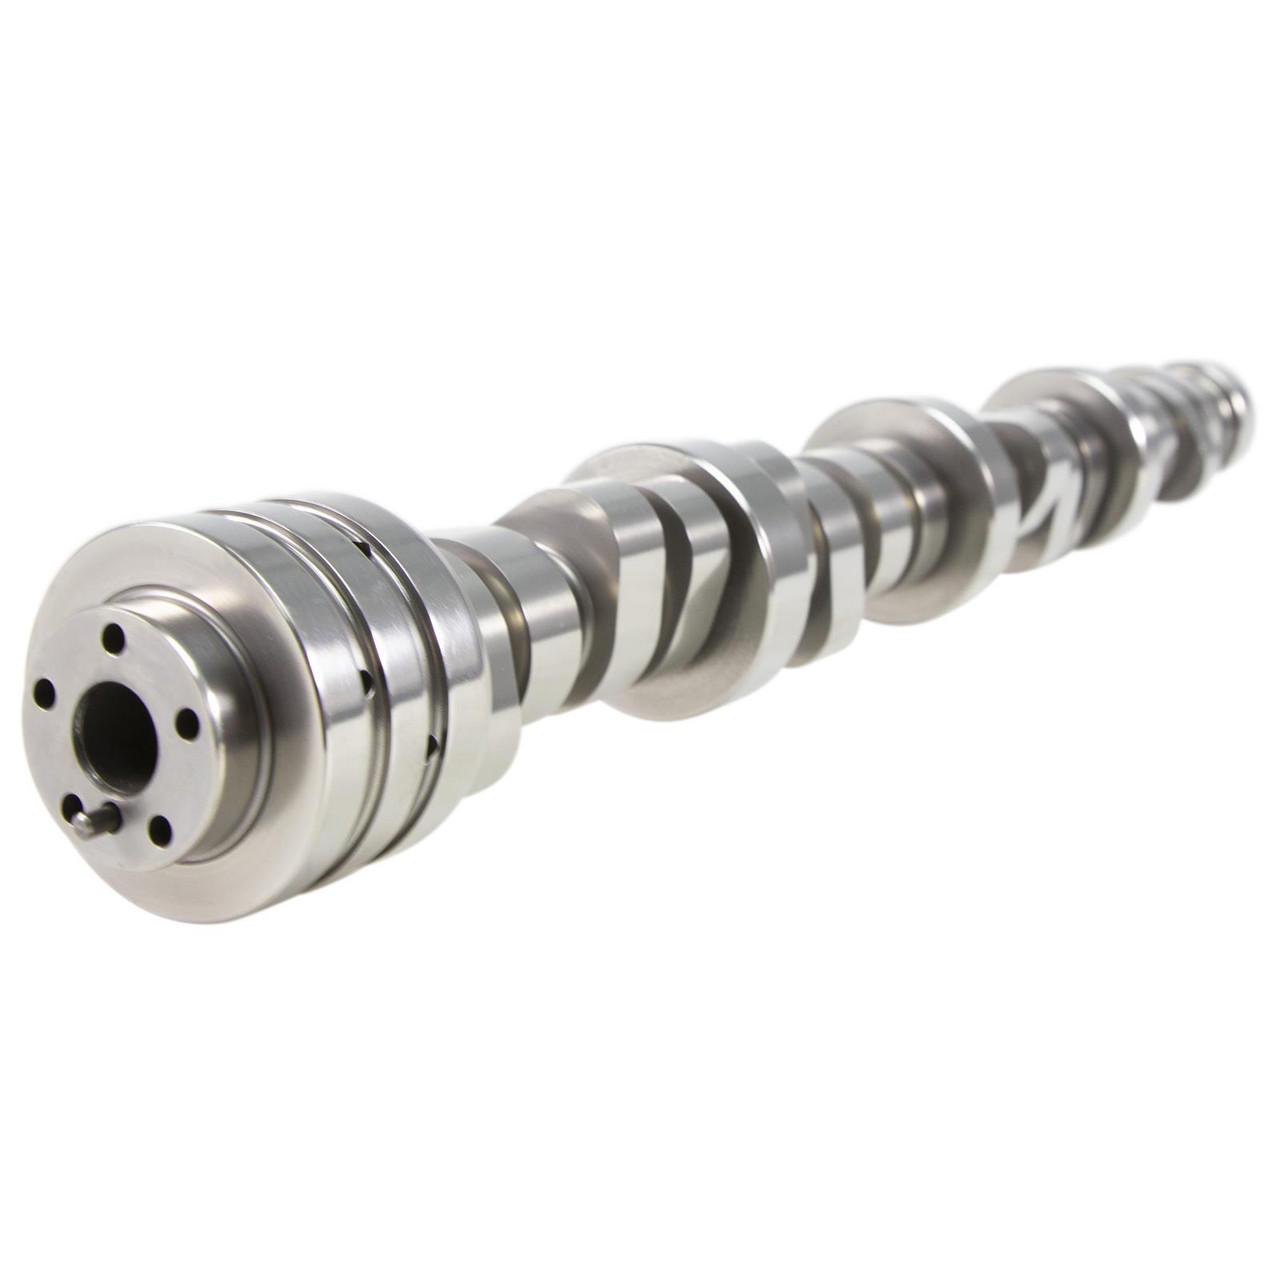 Comp Cams HRT 229/241 @ 117 Camshaft | Hemi 6.4 | Stage 2 Boost Cam